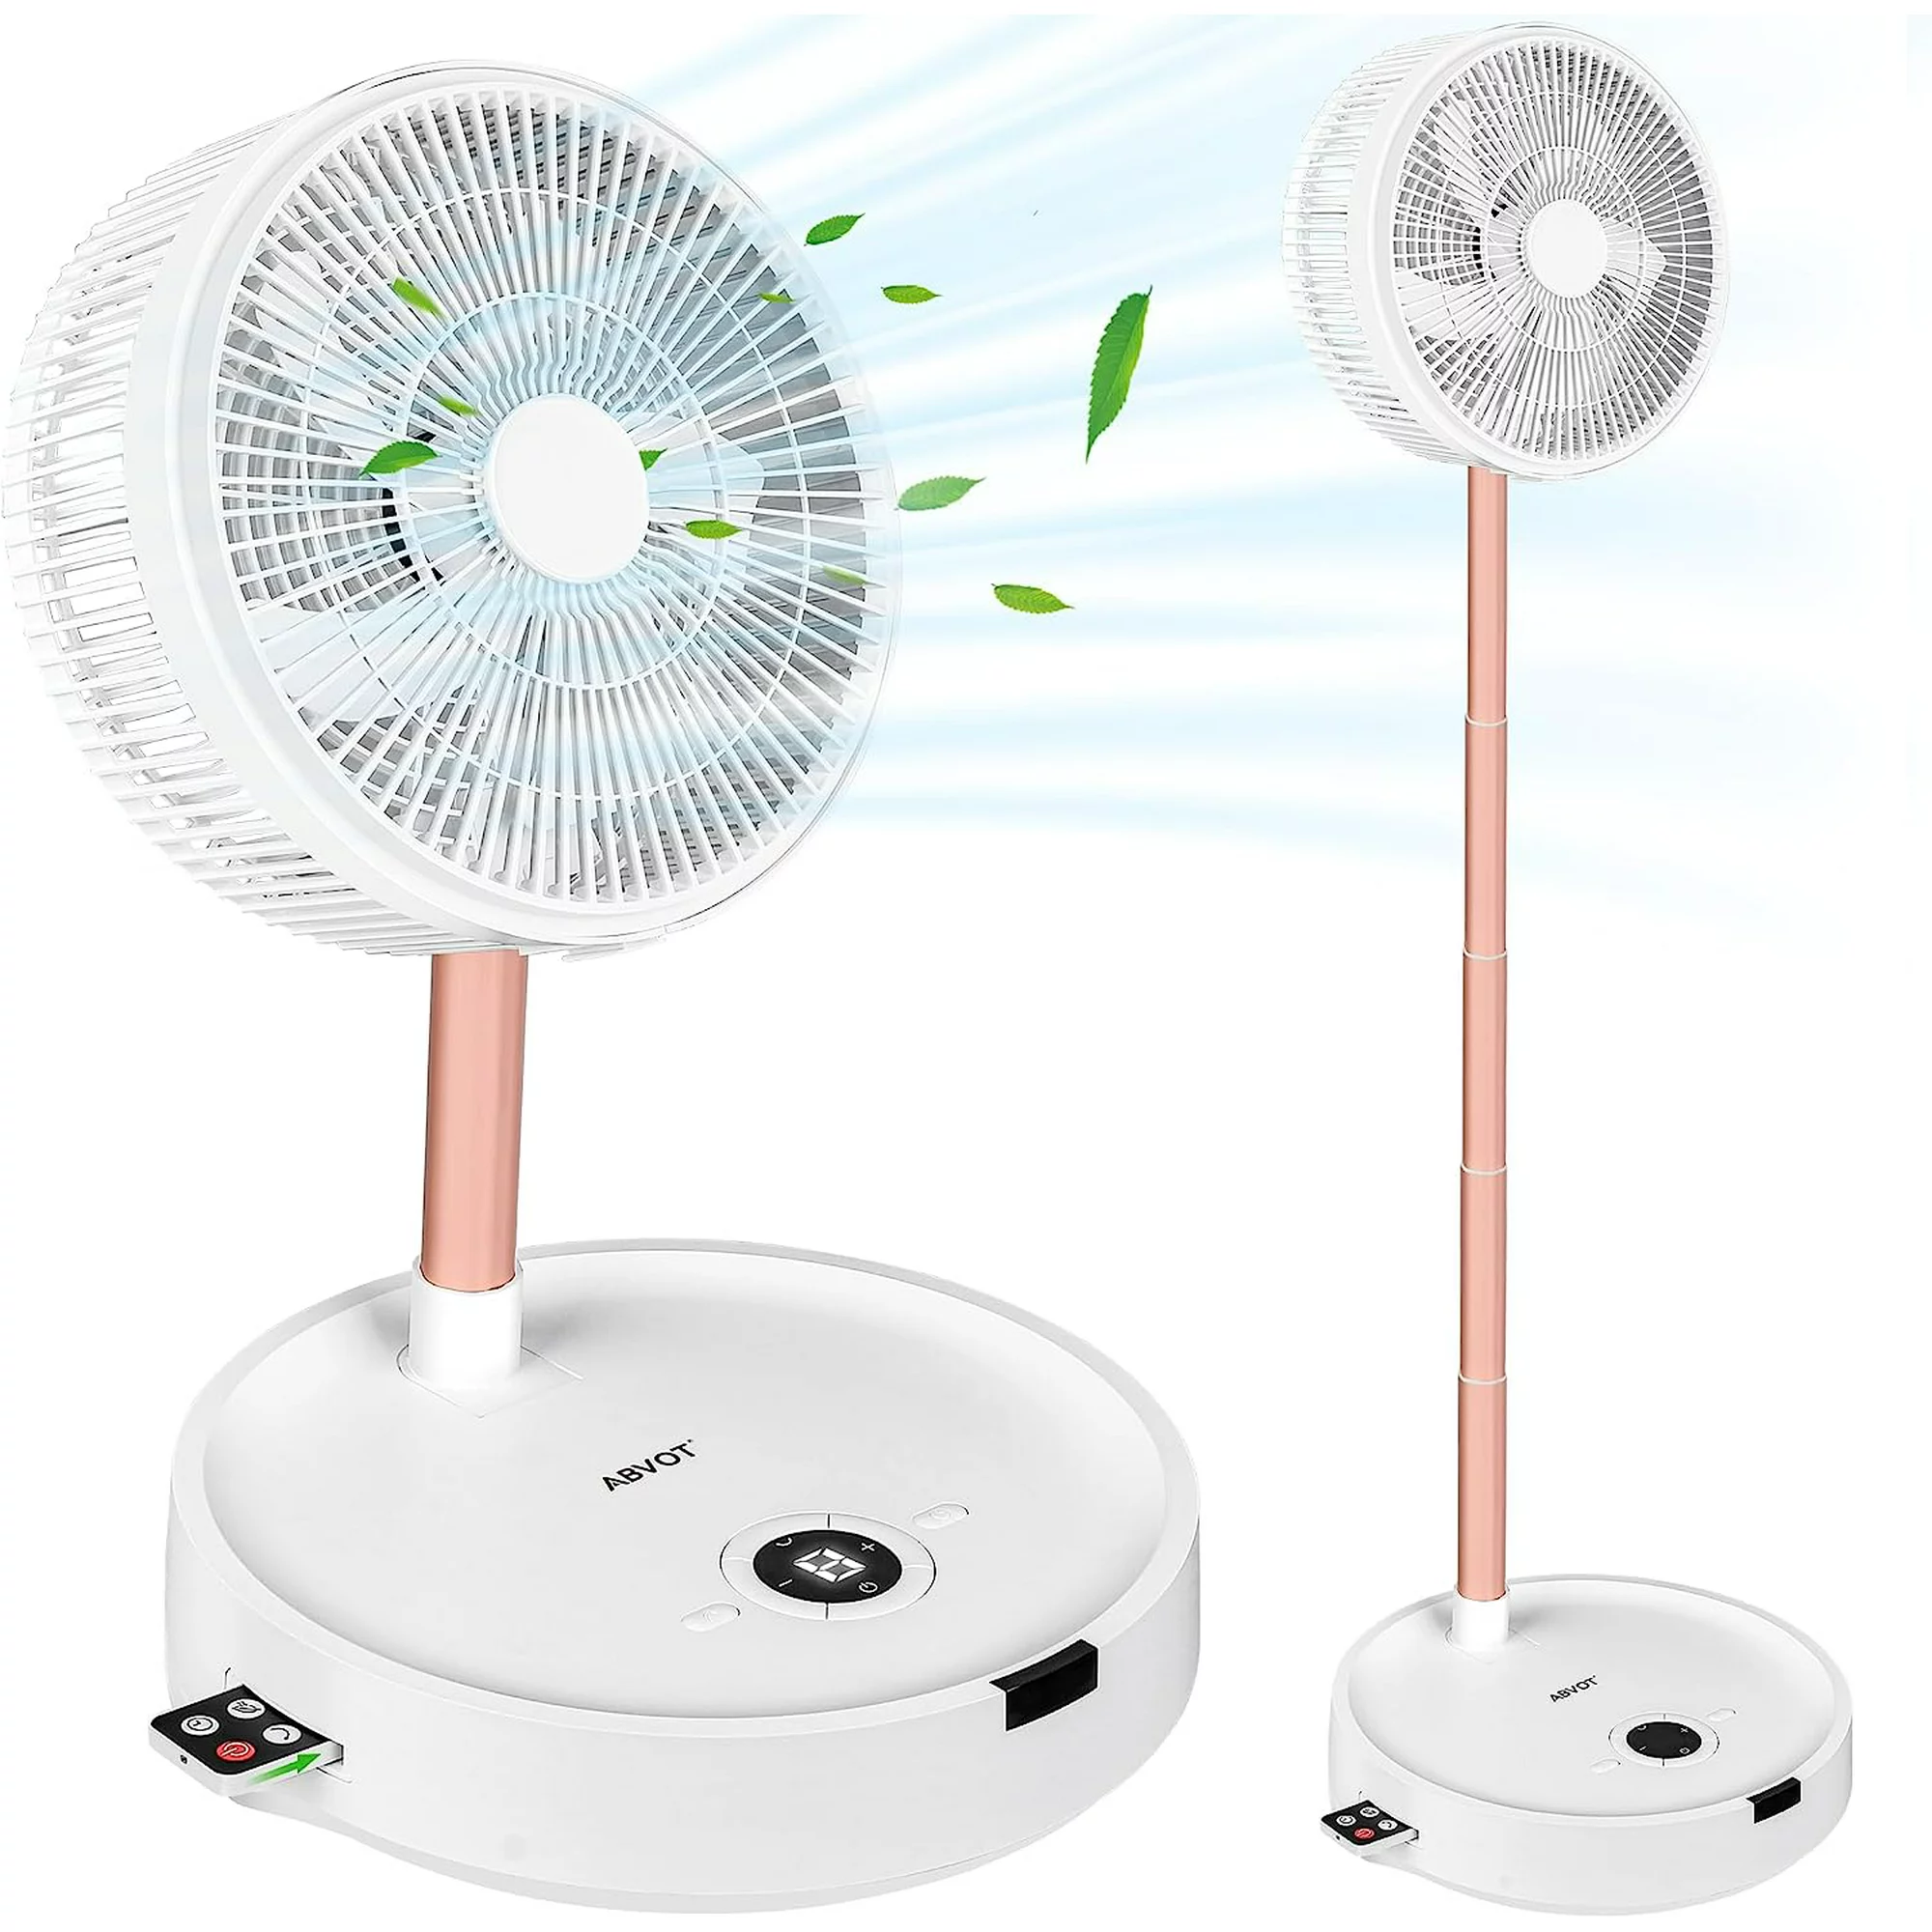 Gazeled 10000mAh Battery Powered Oscillating Fan,12" Rechargeable Foldaway Fan with Timer, 19H Working Time, Height Adjustment, 4 Speeds, Remote Control, Portable Standing Fan for RV, Travel, Camping